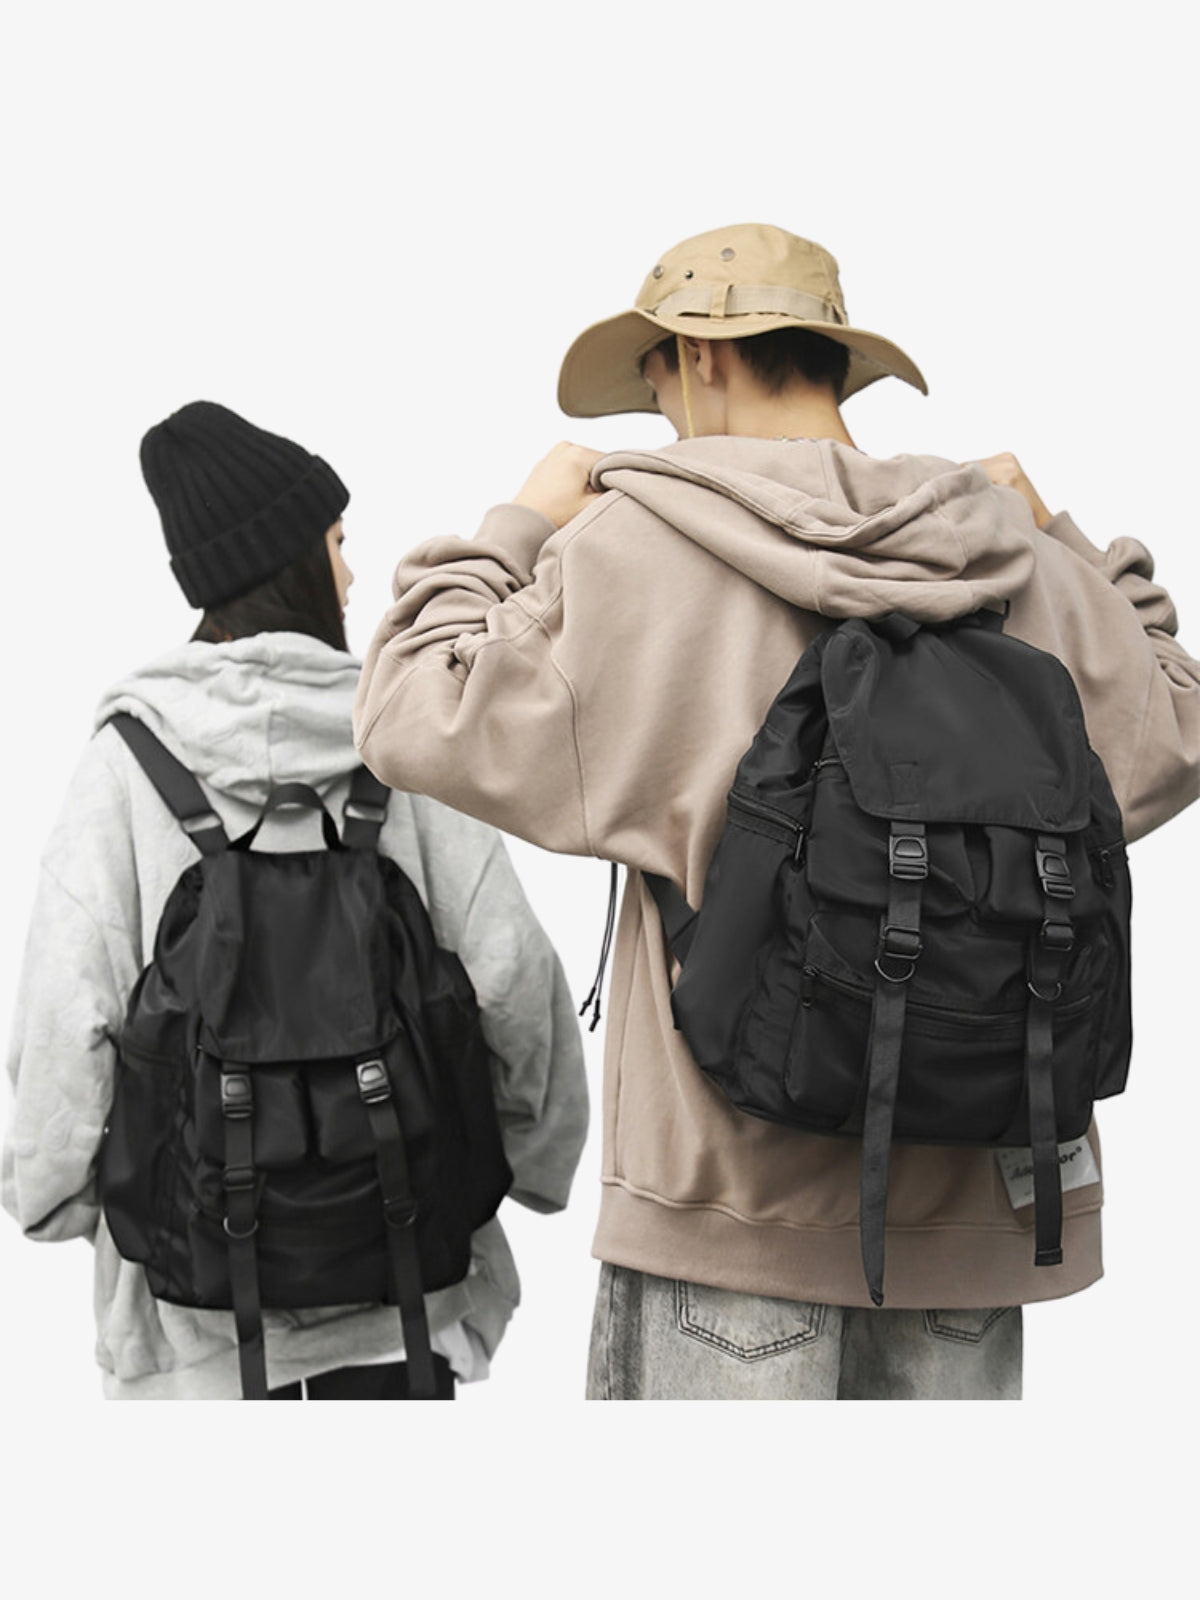 TideTech Functional Backpack